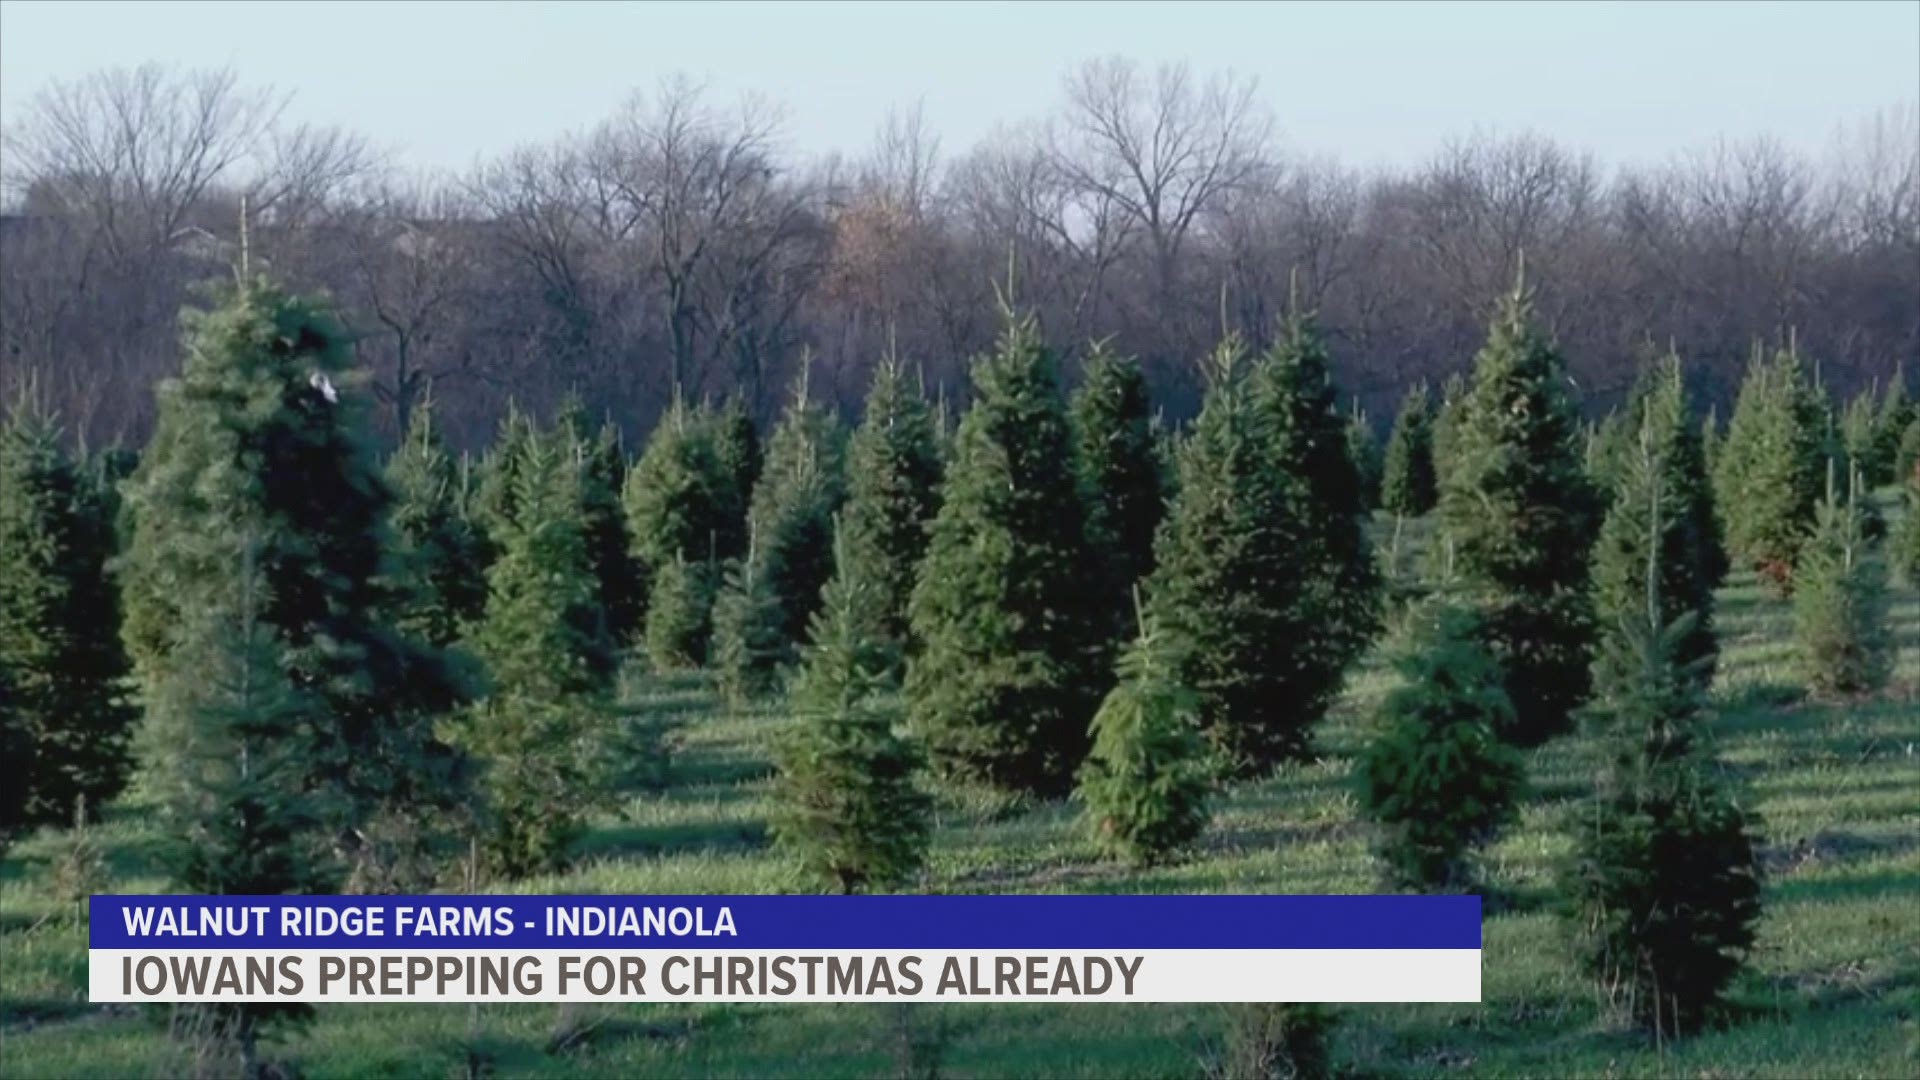 Walnut Ridge Farm in Indianola is looking forward to their 38th season of selling Christmas trees.